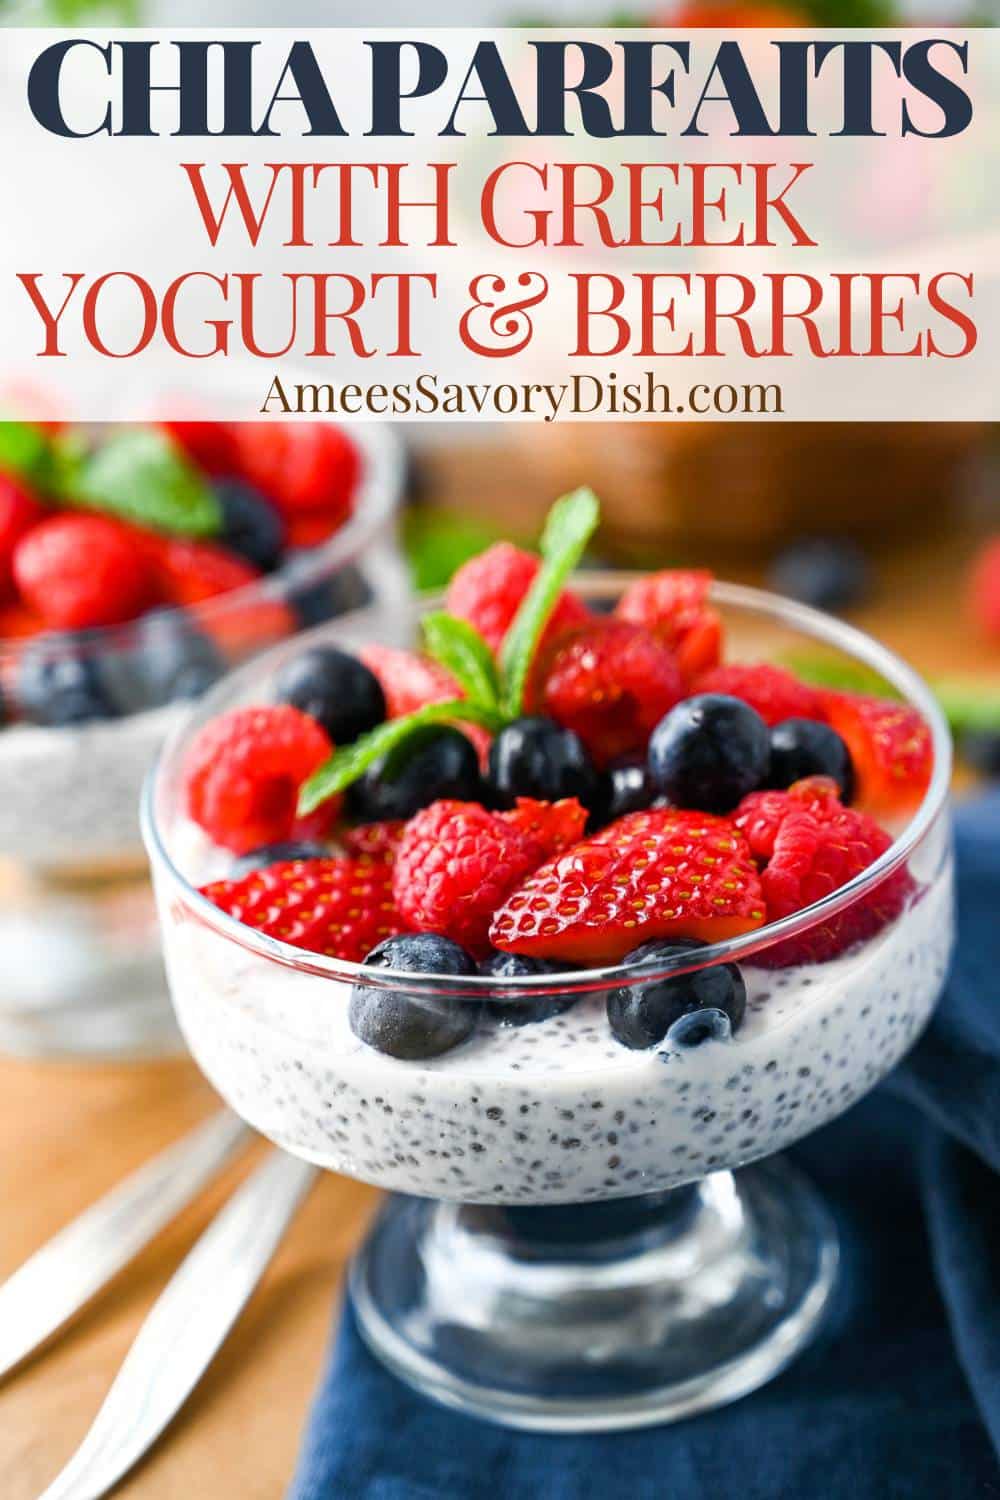 This refreshing Chia Parfait combines protein-packed Greek yogurt, wholesome chia seeds, and seasonal berries for a healthy sweet treat. via @Ameessavorydish